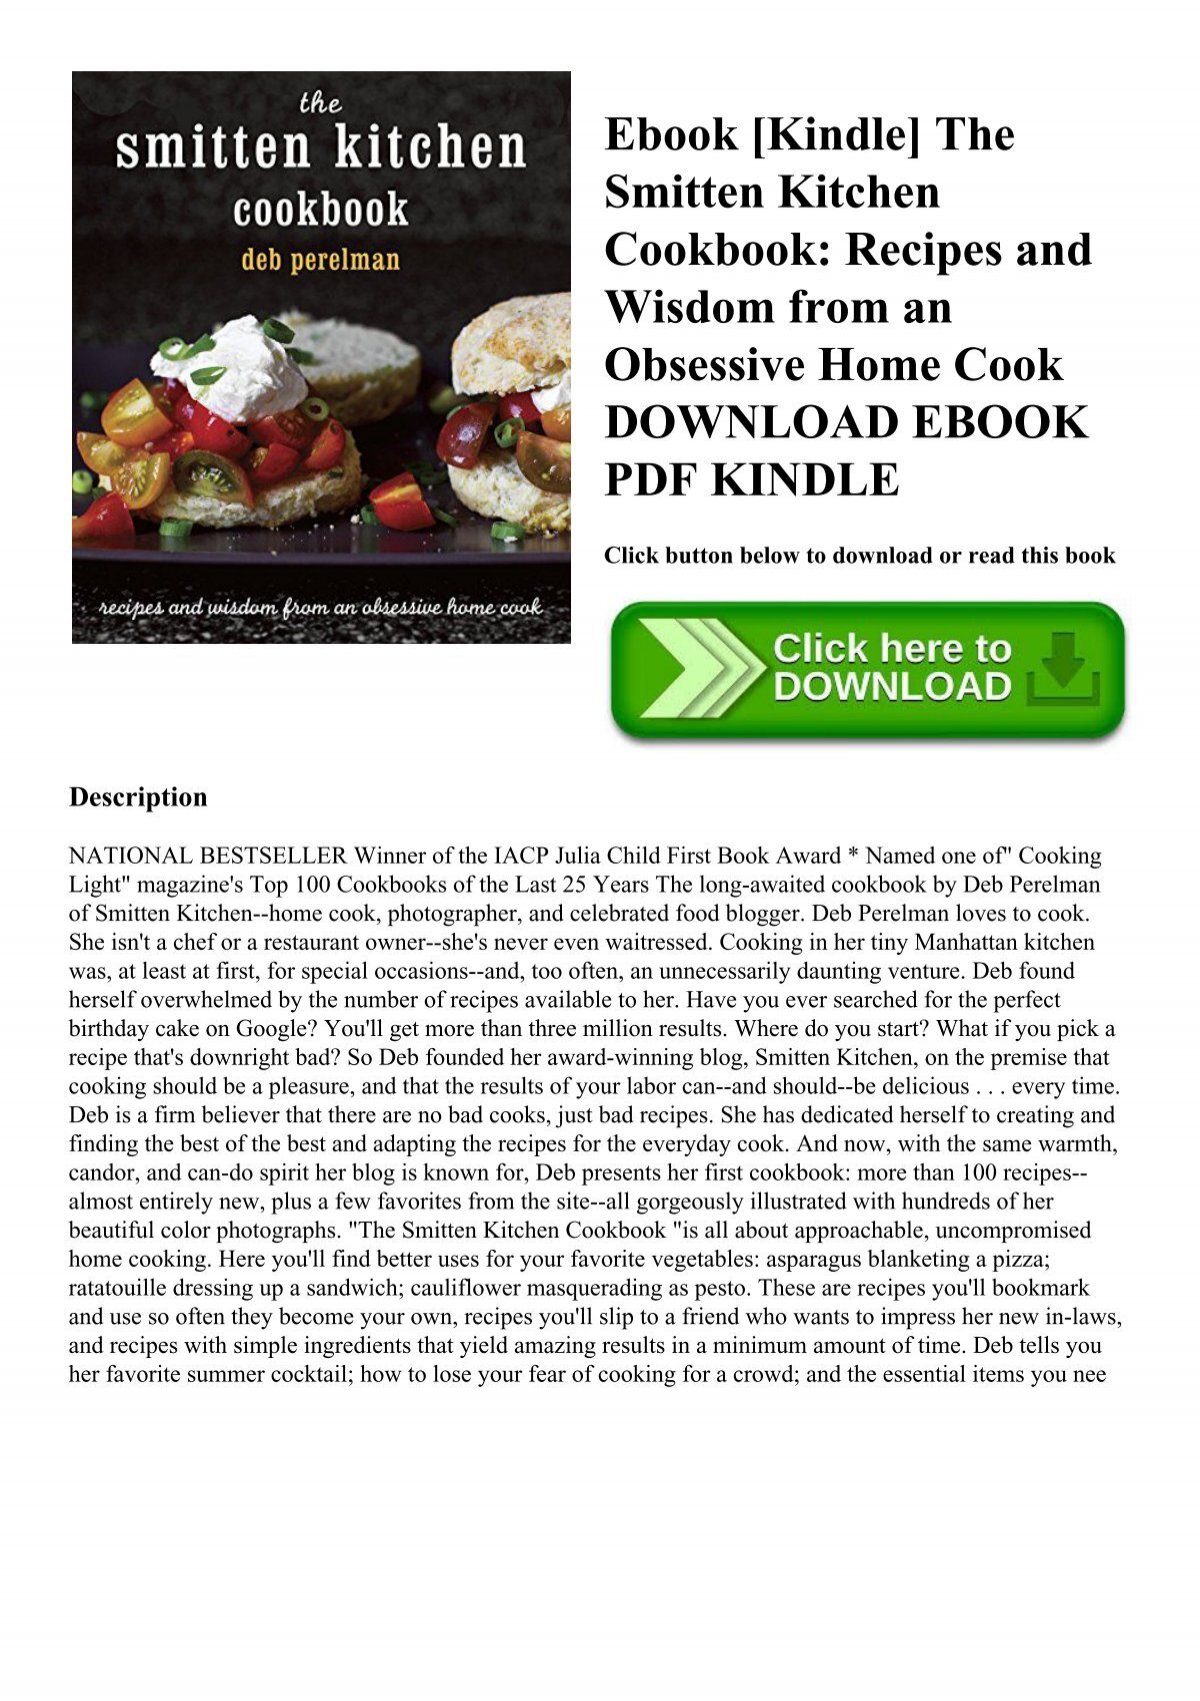 Ebook Kindle The Smitten Kitchen Cookbook Recipes And Wisdom From An Obsessive Home Cook Download Ebook Pdf Kindle